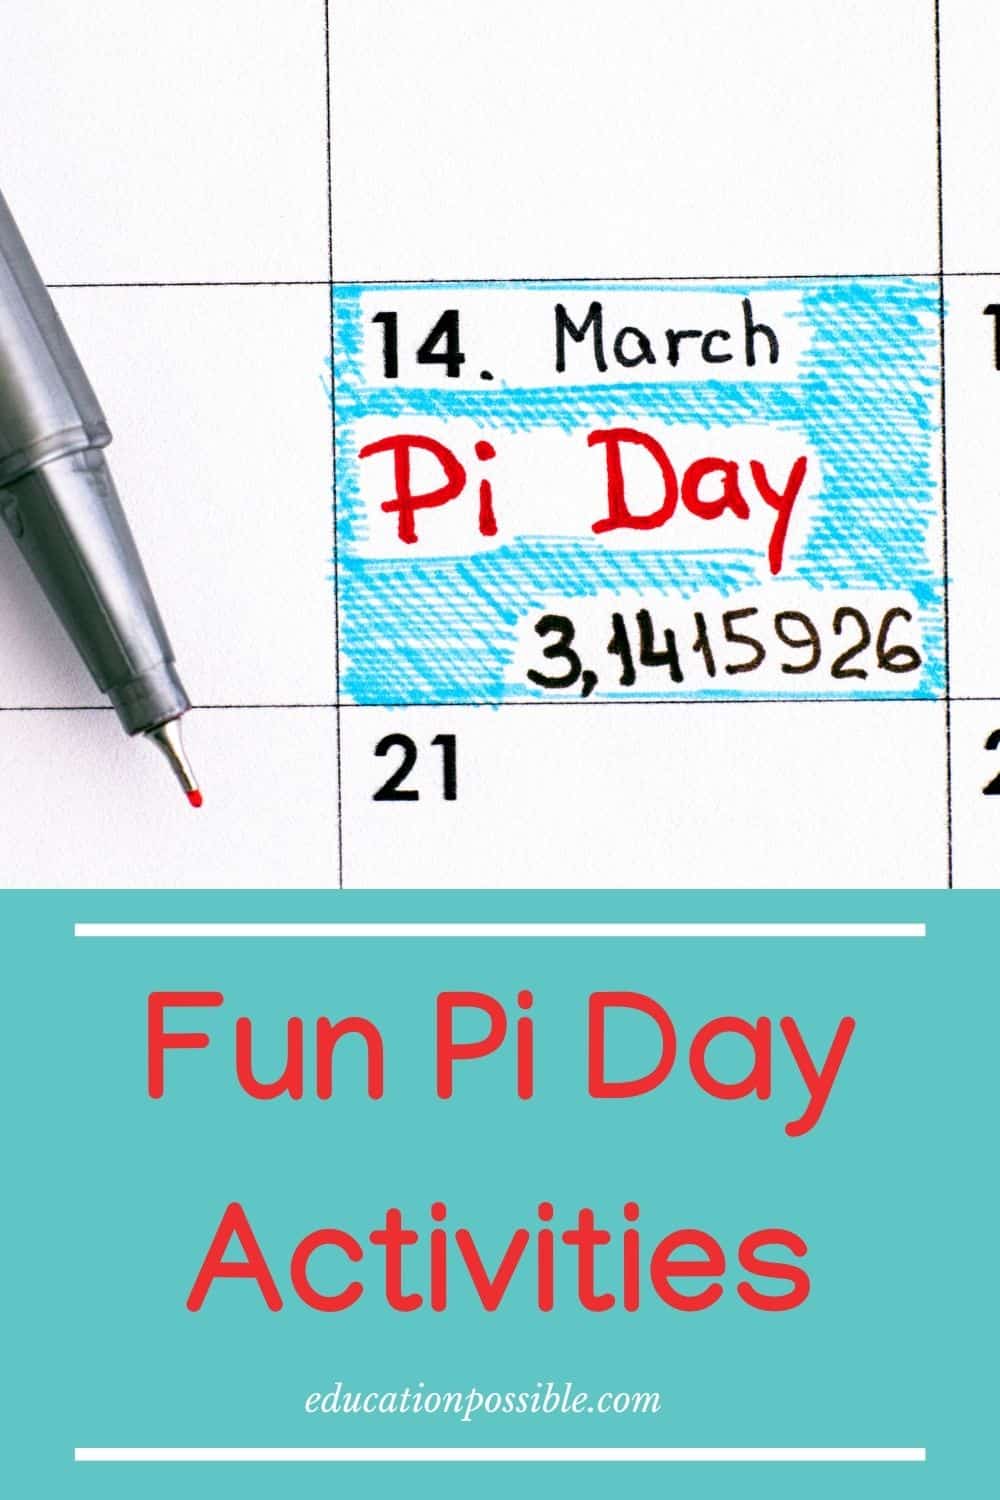 Graphic of Pi Day and it's number on a calendar on March 14, with a red pen next to it.